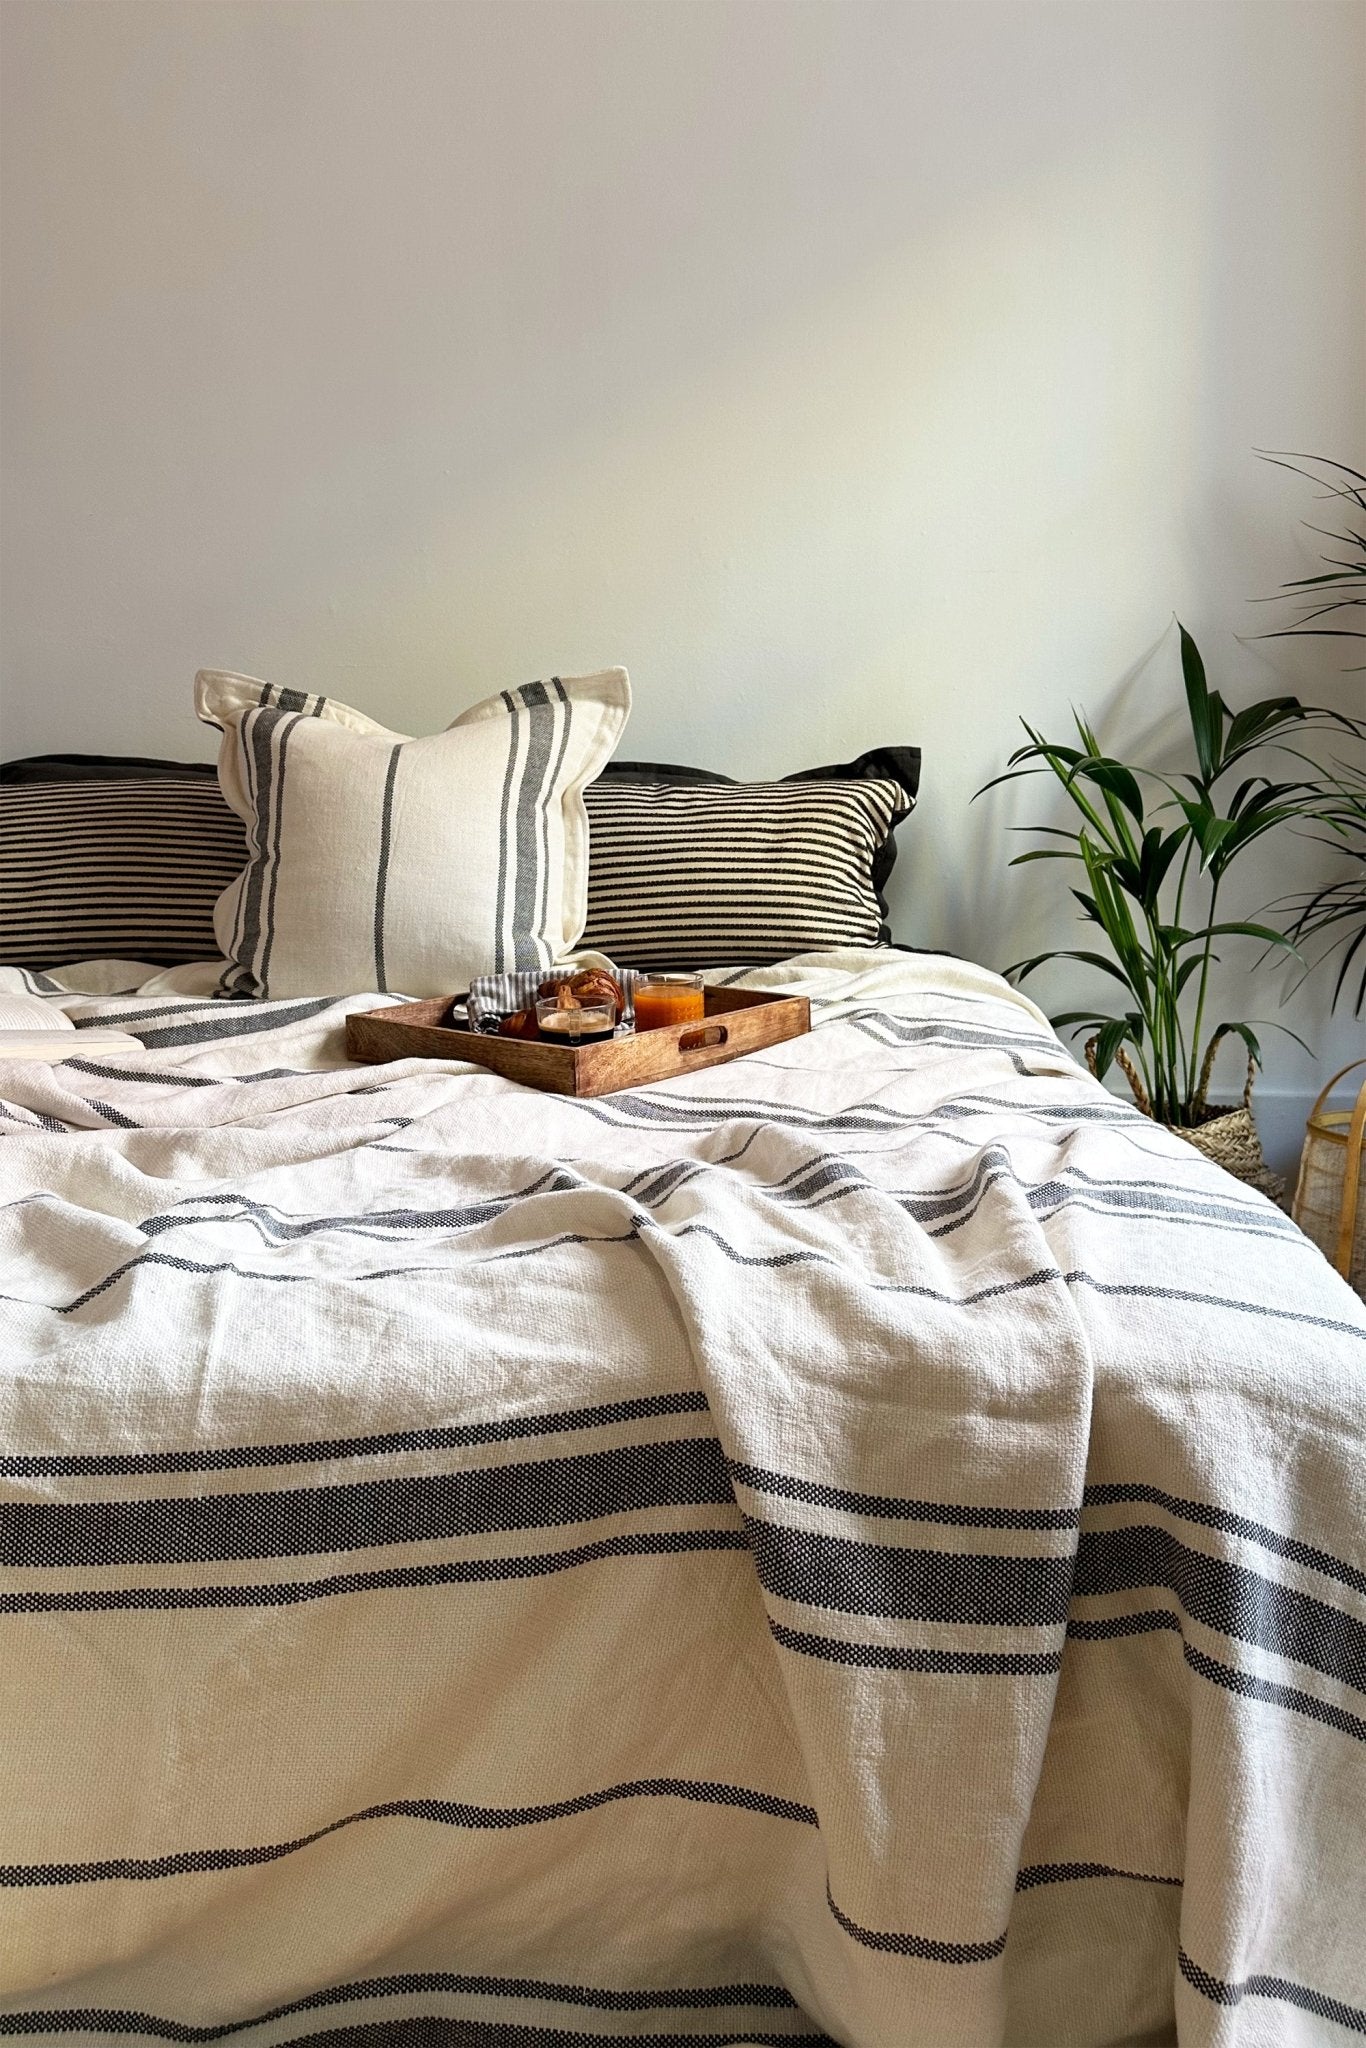 Striped Linen Bed Throw Blanket in Grey and Cream - Biggs & Hill - Blanket - Bedspread - blanket - charcoal